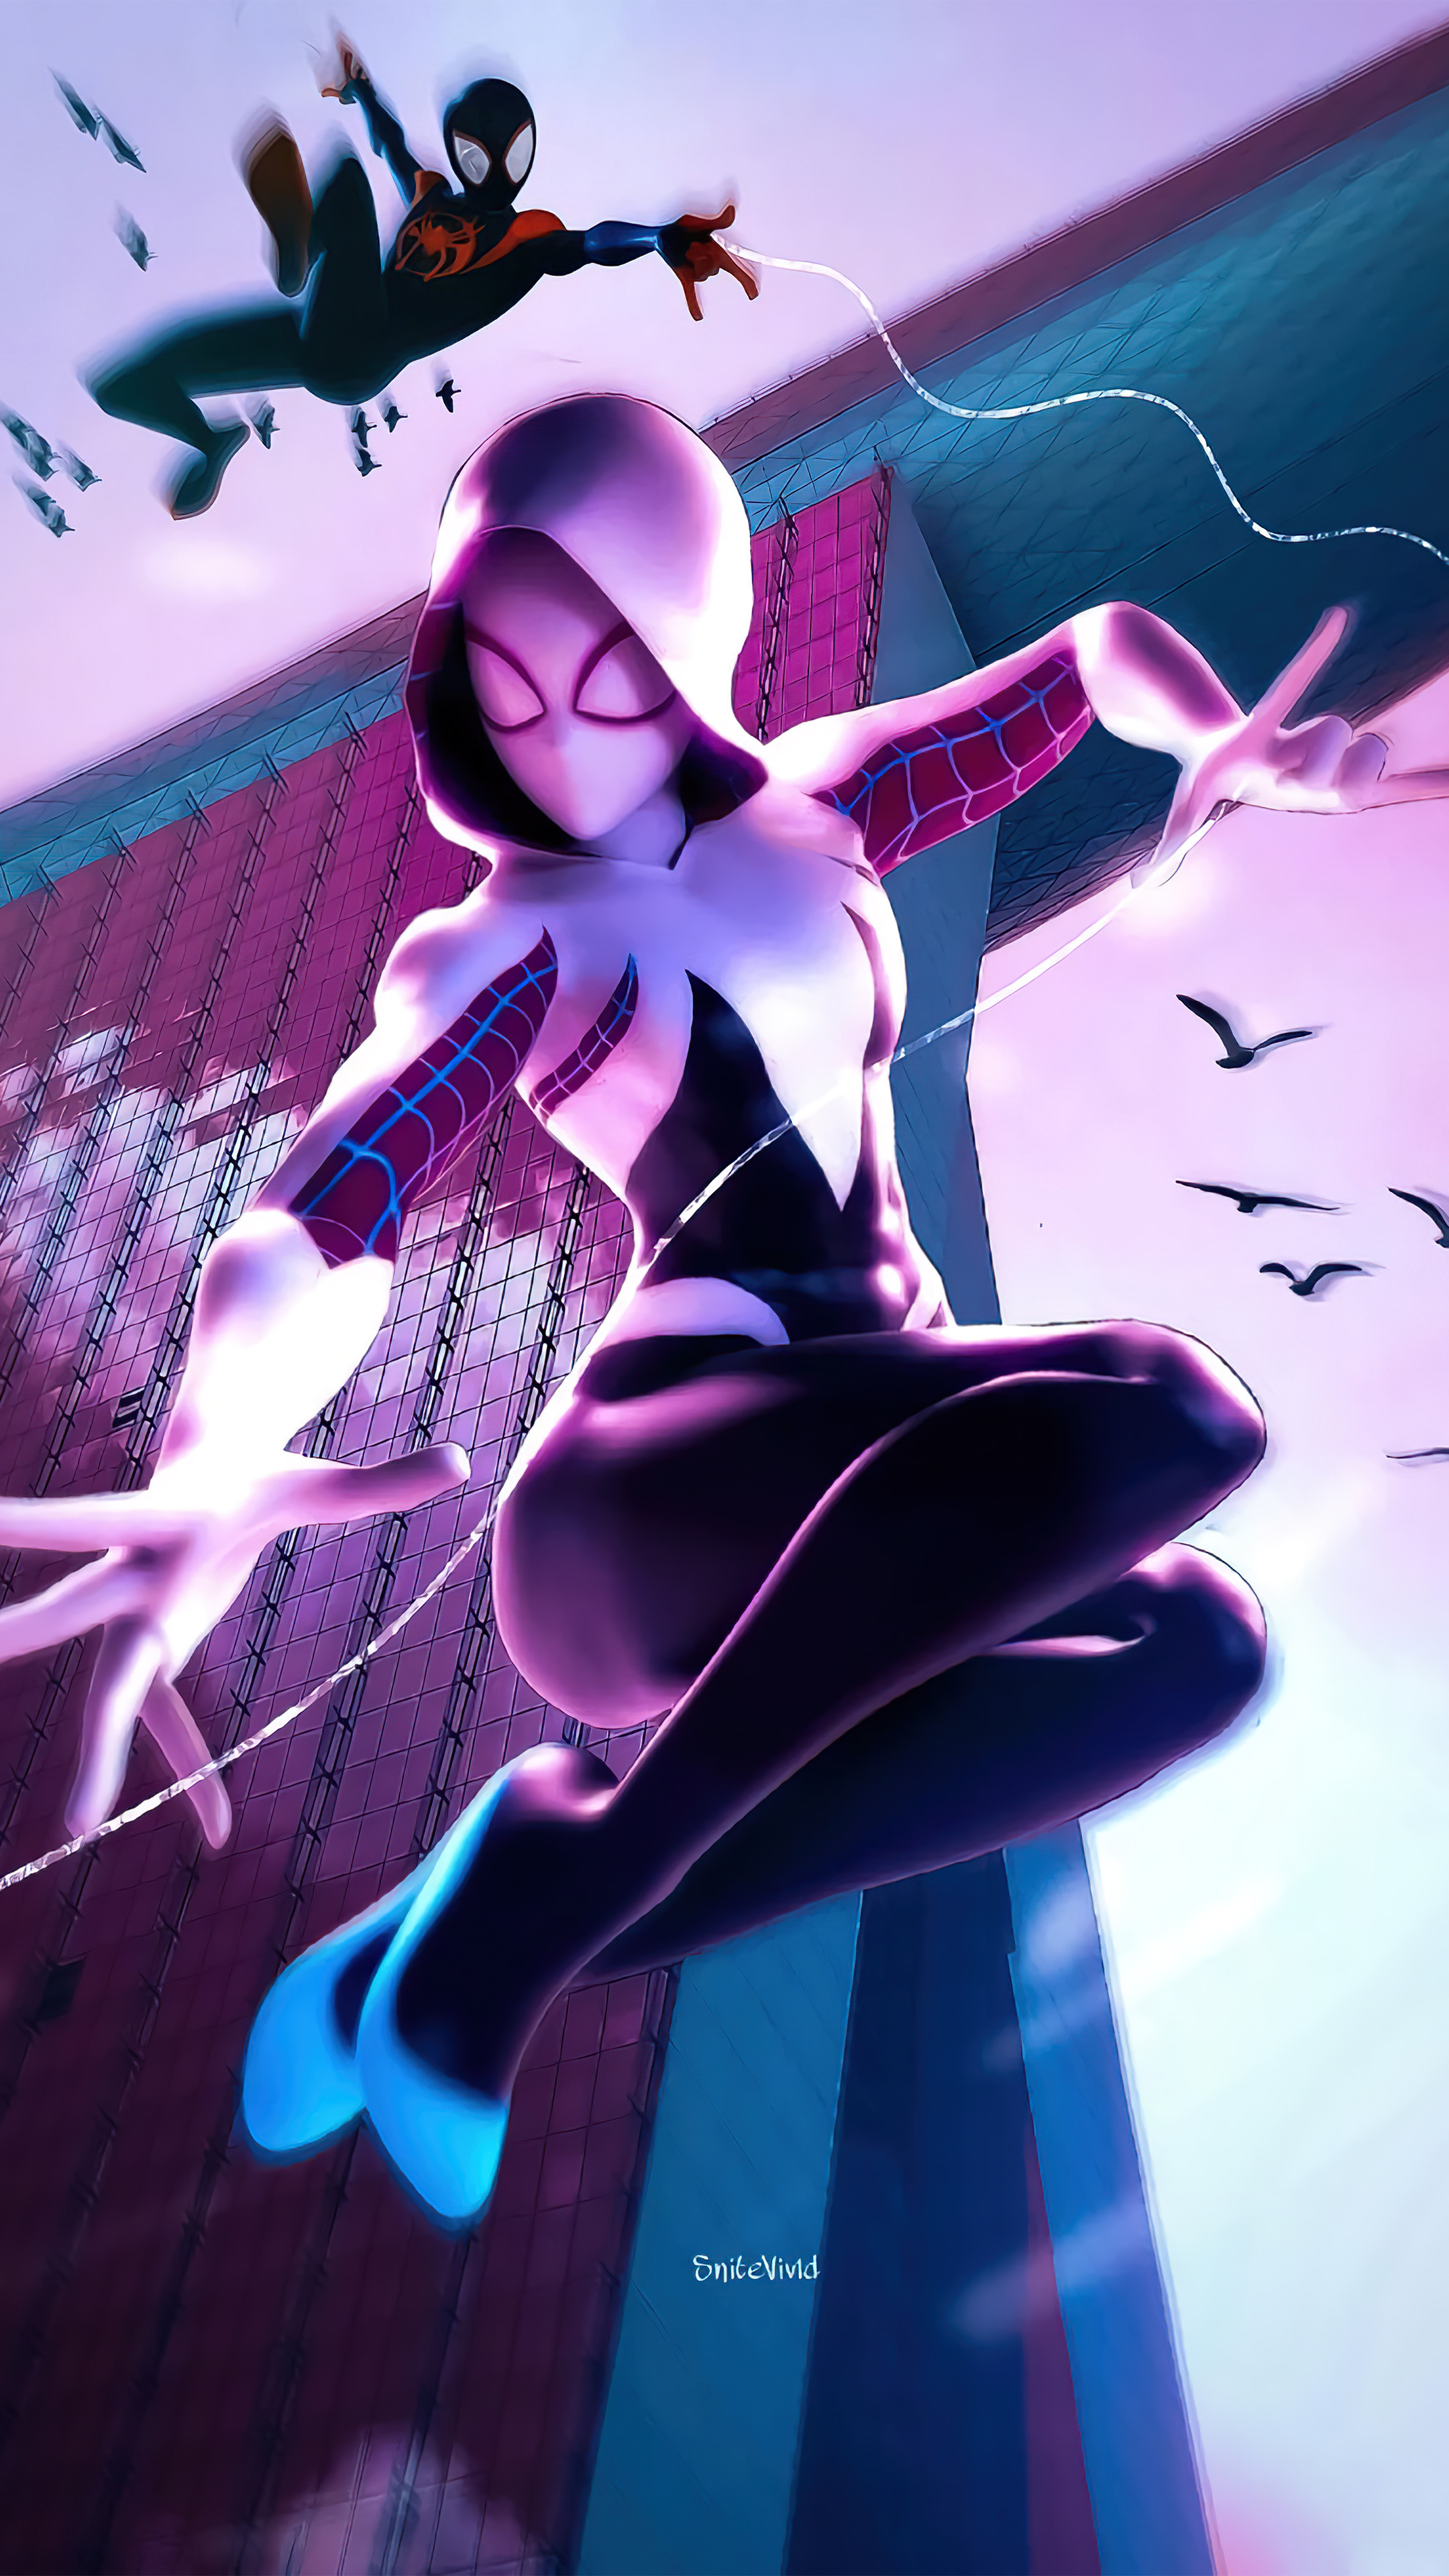 Gwen Stacy and Spider-Man, Sony Xperia wallpapers, High quality images, Captivating scenes, 2160x3840 4K Handy